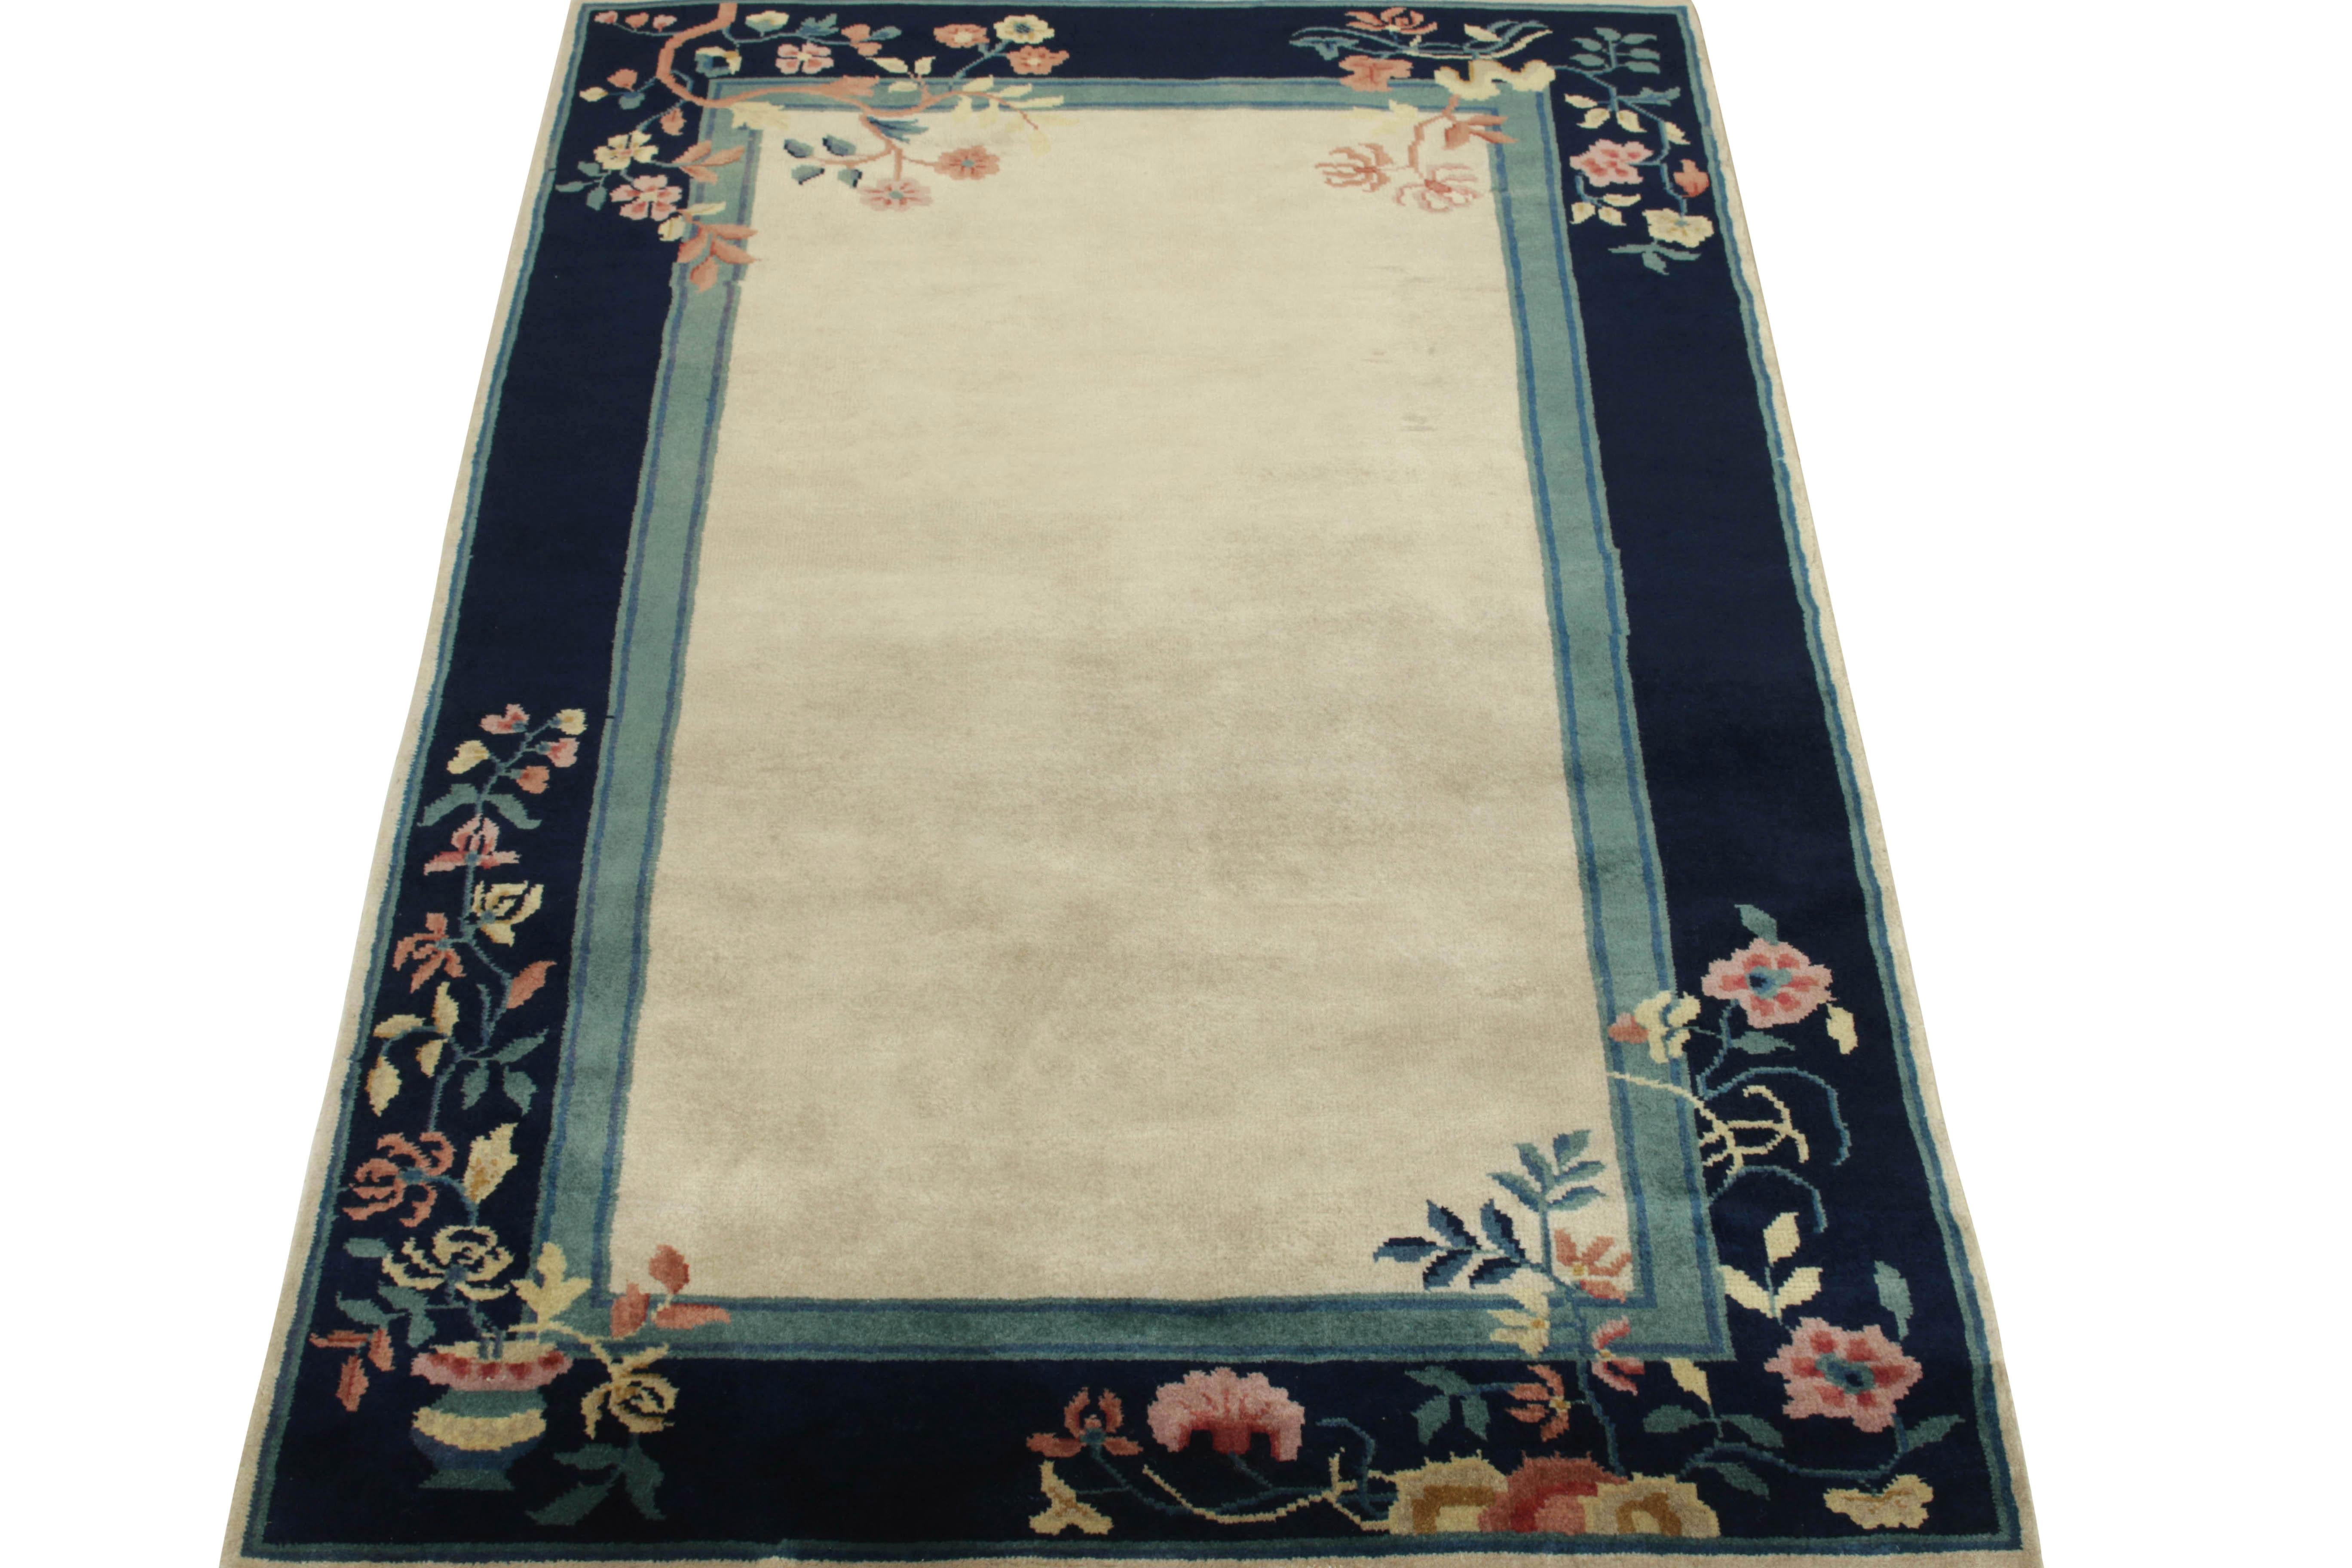 Joining Rug & Kilim’s Antique & Vintage selections, a hand-knotted vintage rug embracing Chinese art deco style of the 1920s—particularly emphasizing floral patterns & decorative imagery lining the corners of deep blue & teal toned borders in